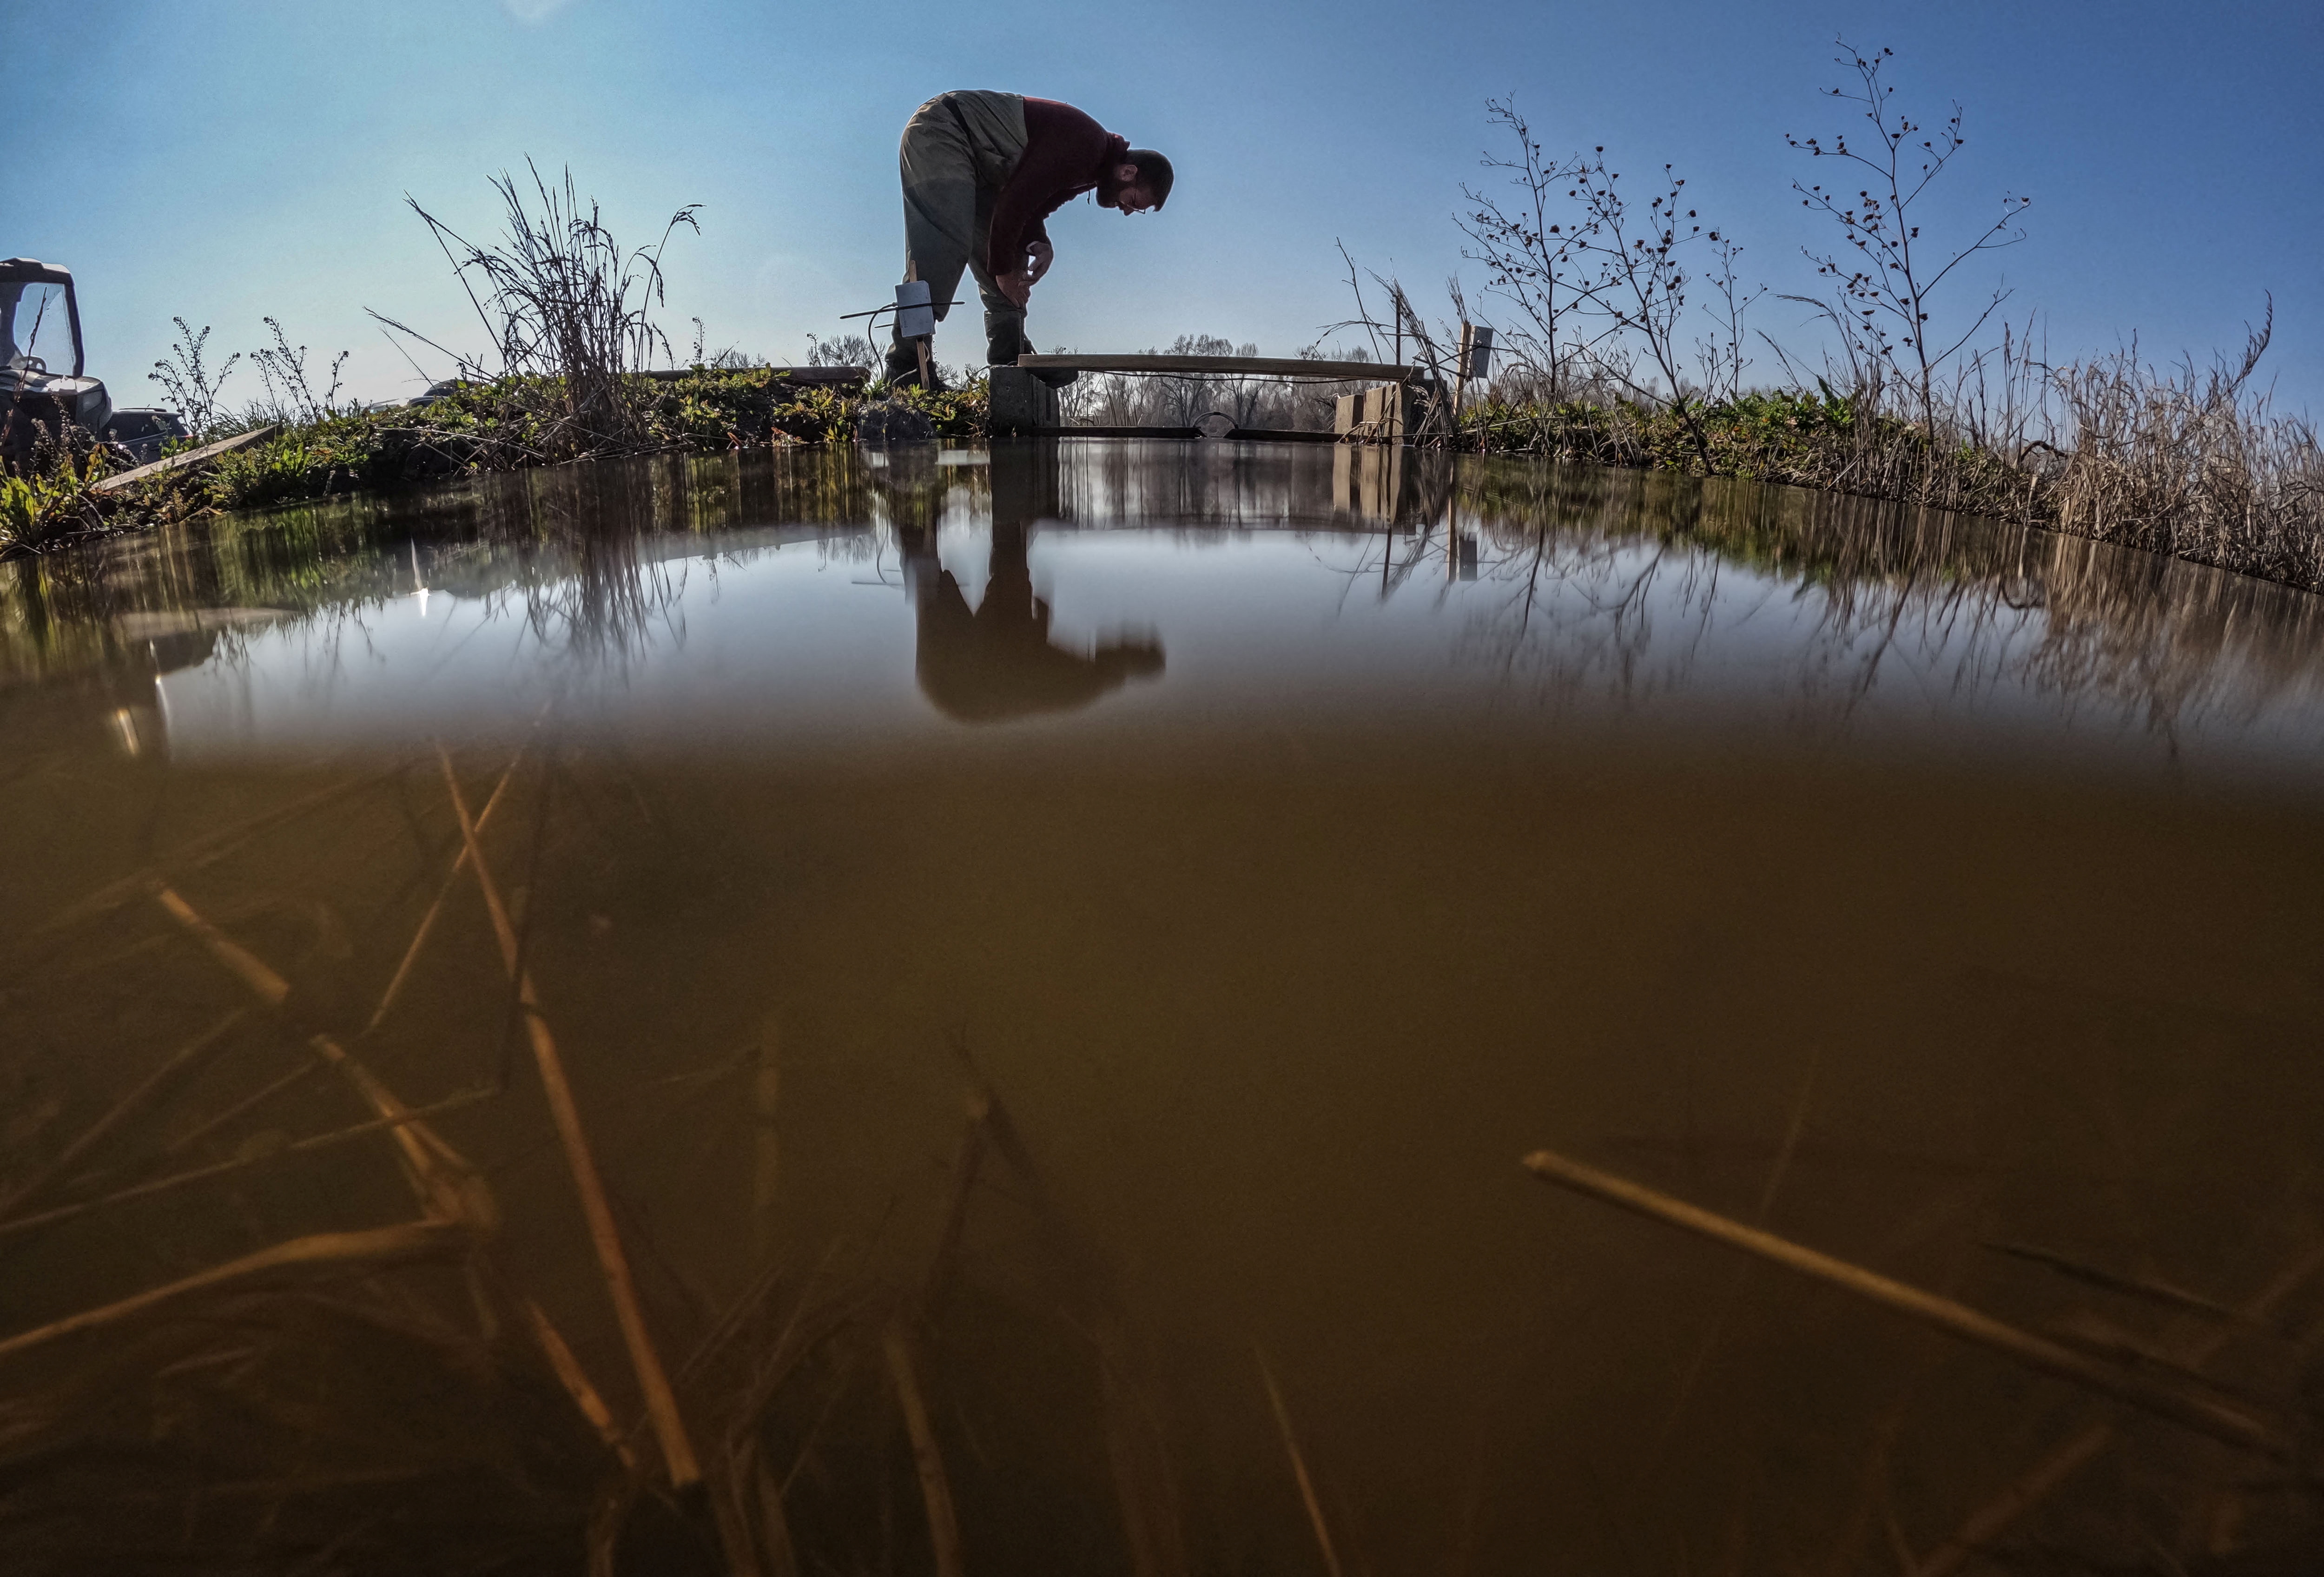 A researcher from University of California, Davis inspects a water gate at a flooded rice field in Robbins, California